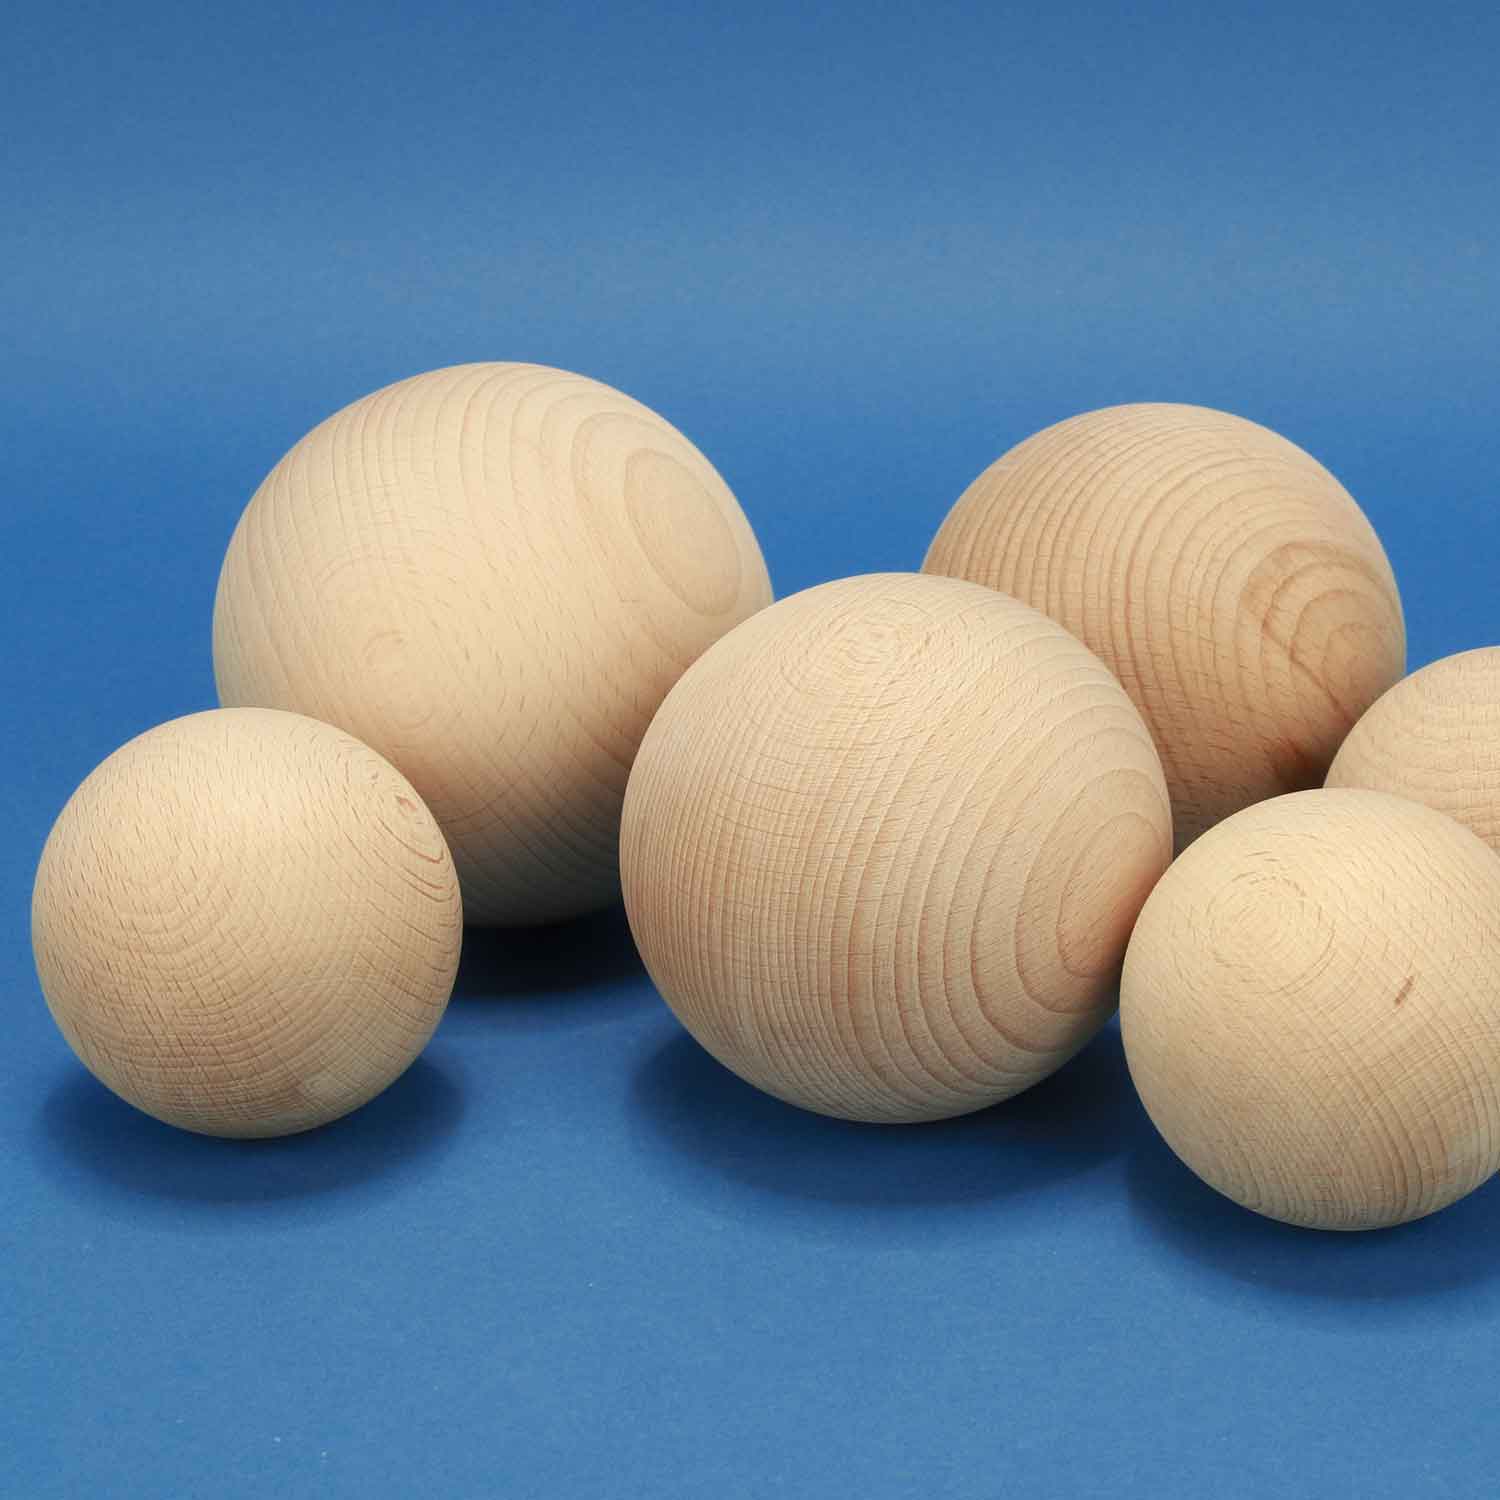 Wooden balls without hole